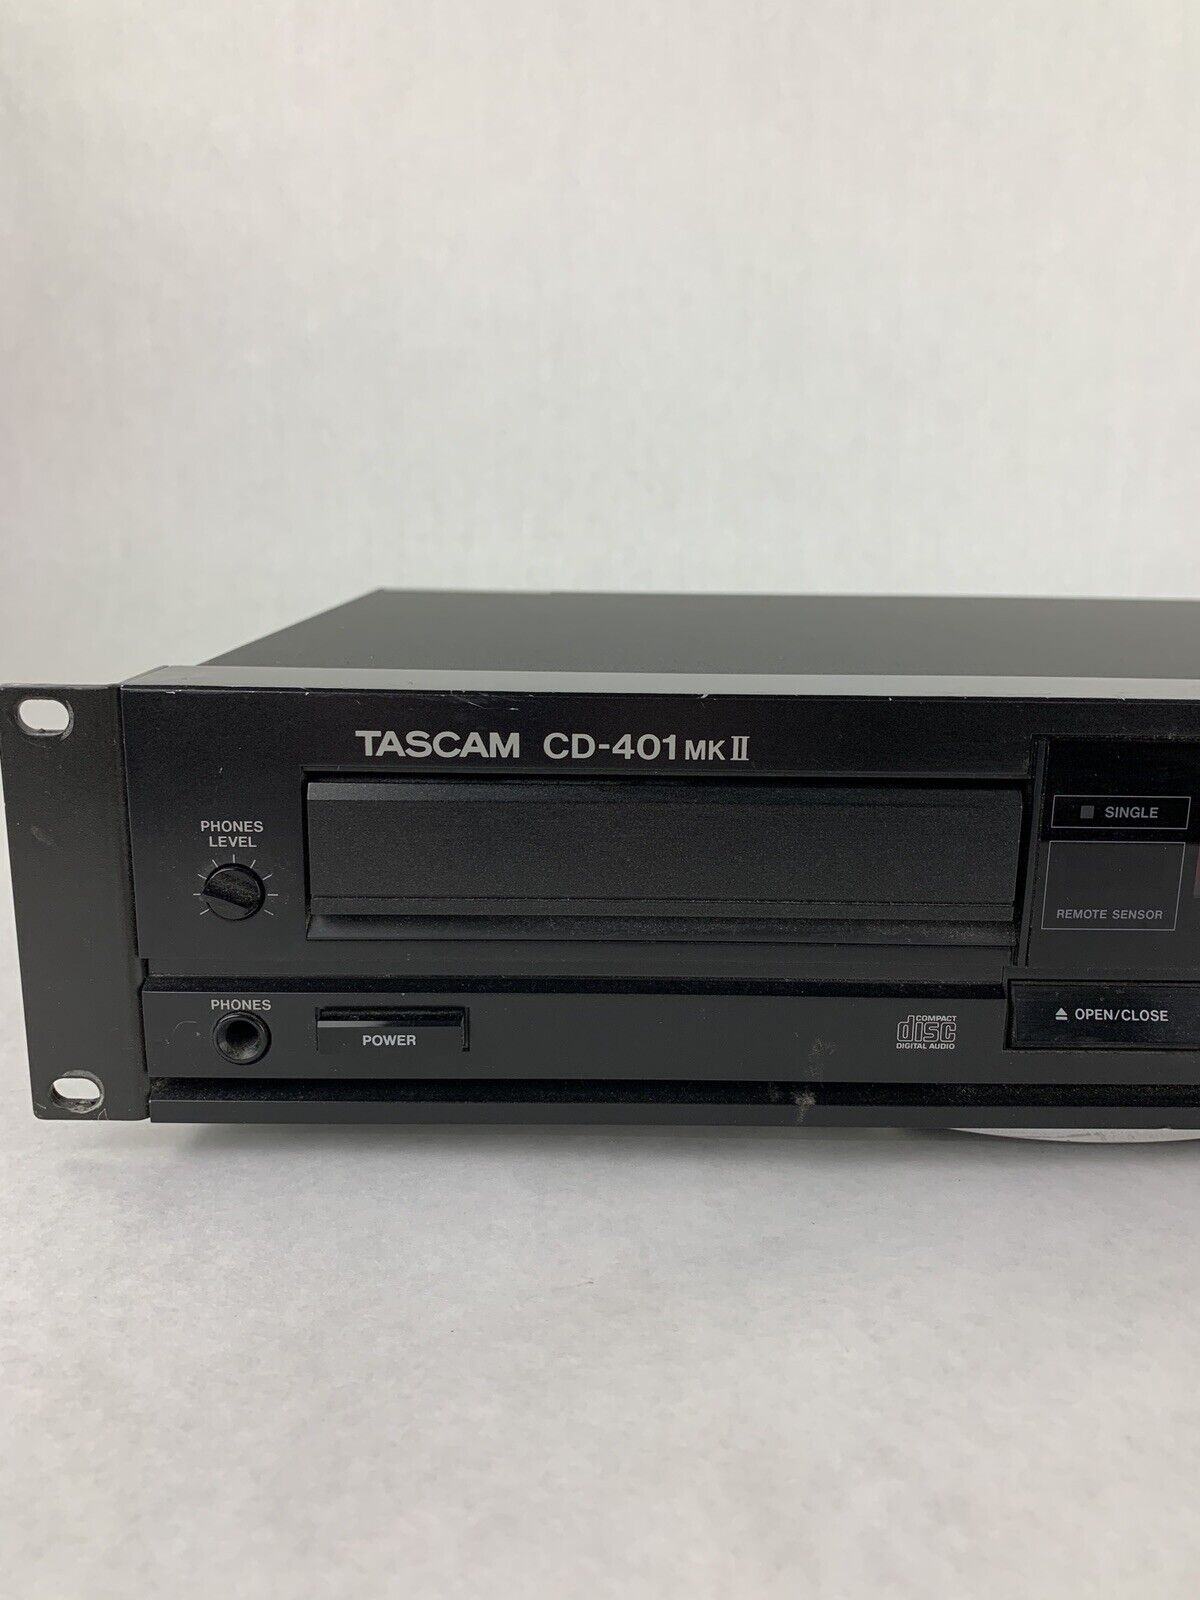 Tascam CD-401 mkII Professional CD Player Broken CD Tray For Parts and Repair